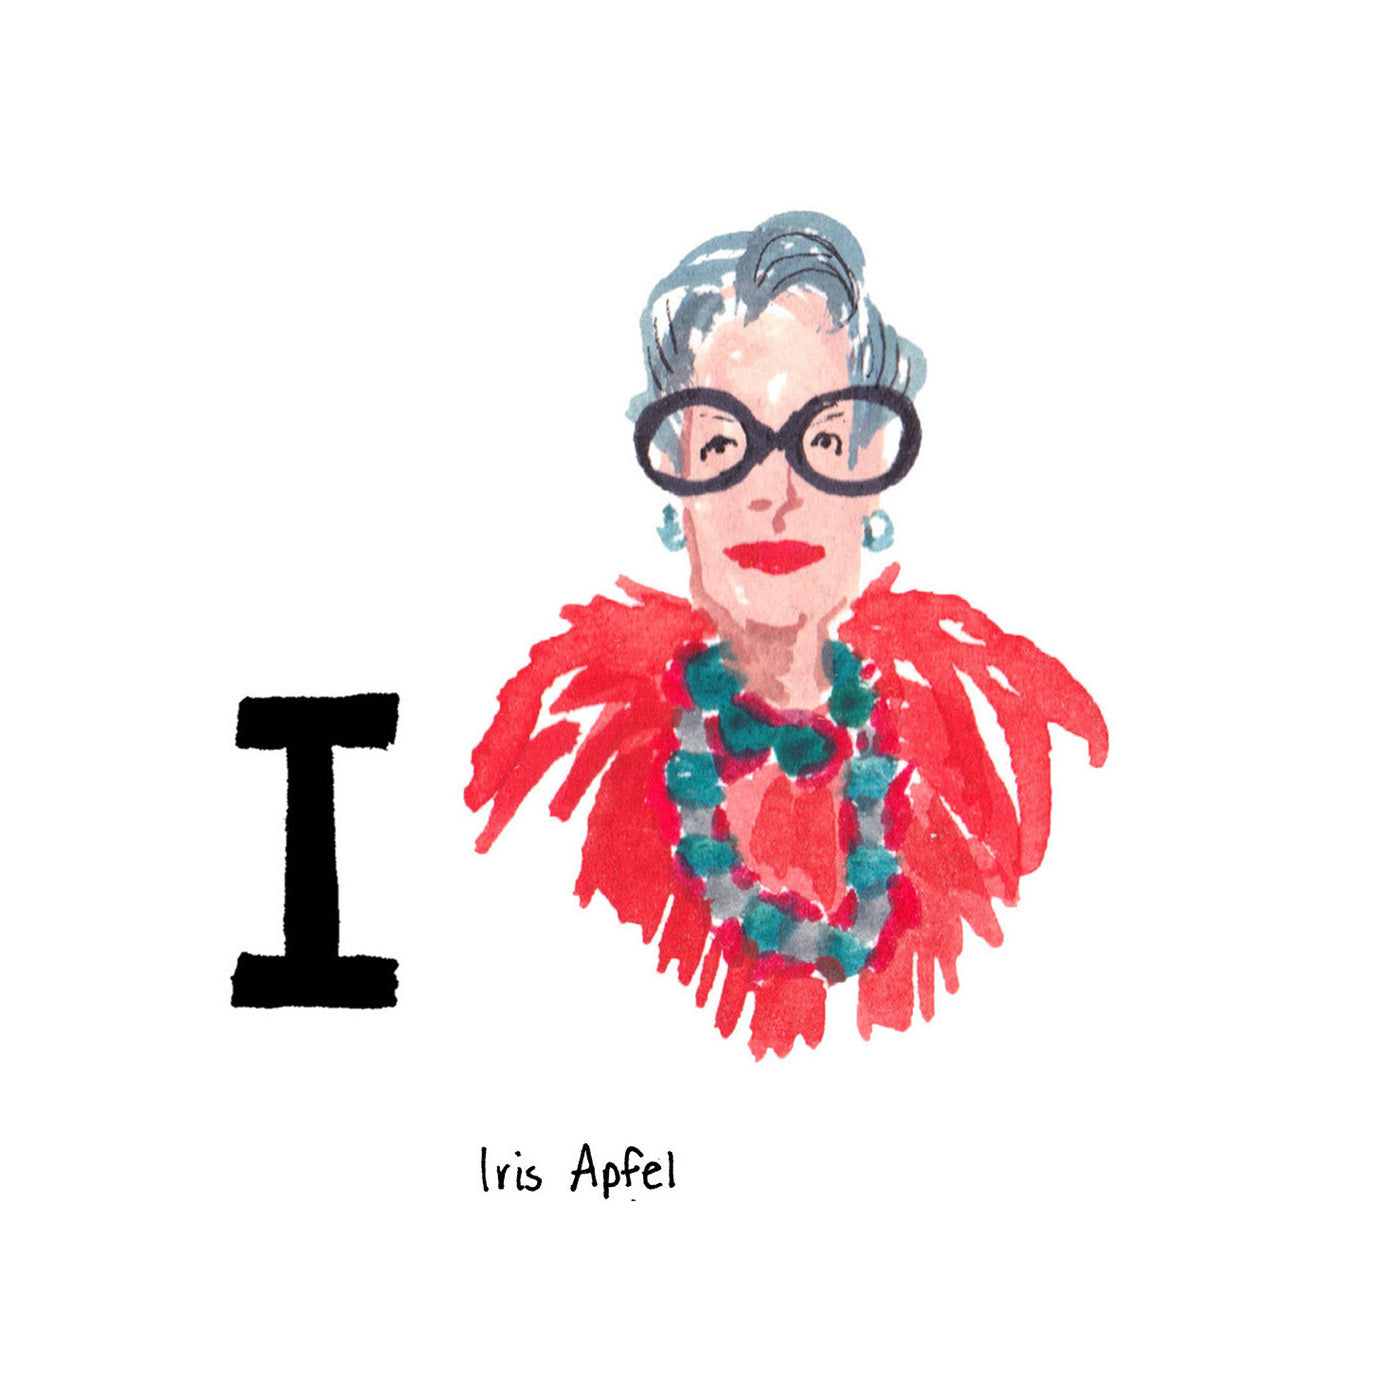 I is for Iris Apfel. Iris Apfel was born in 1921 and grew up in Queens. A collector, interior designer, entrepreneur, and fashion icon she’s best known for her oversized glasses, and bold, layered accessories.